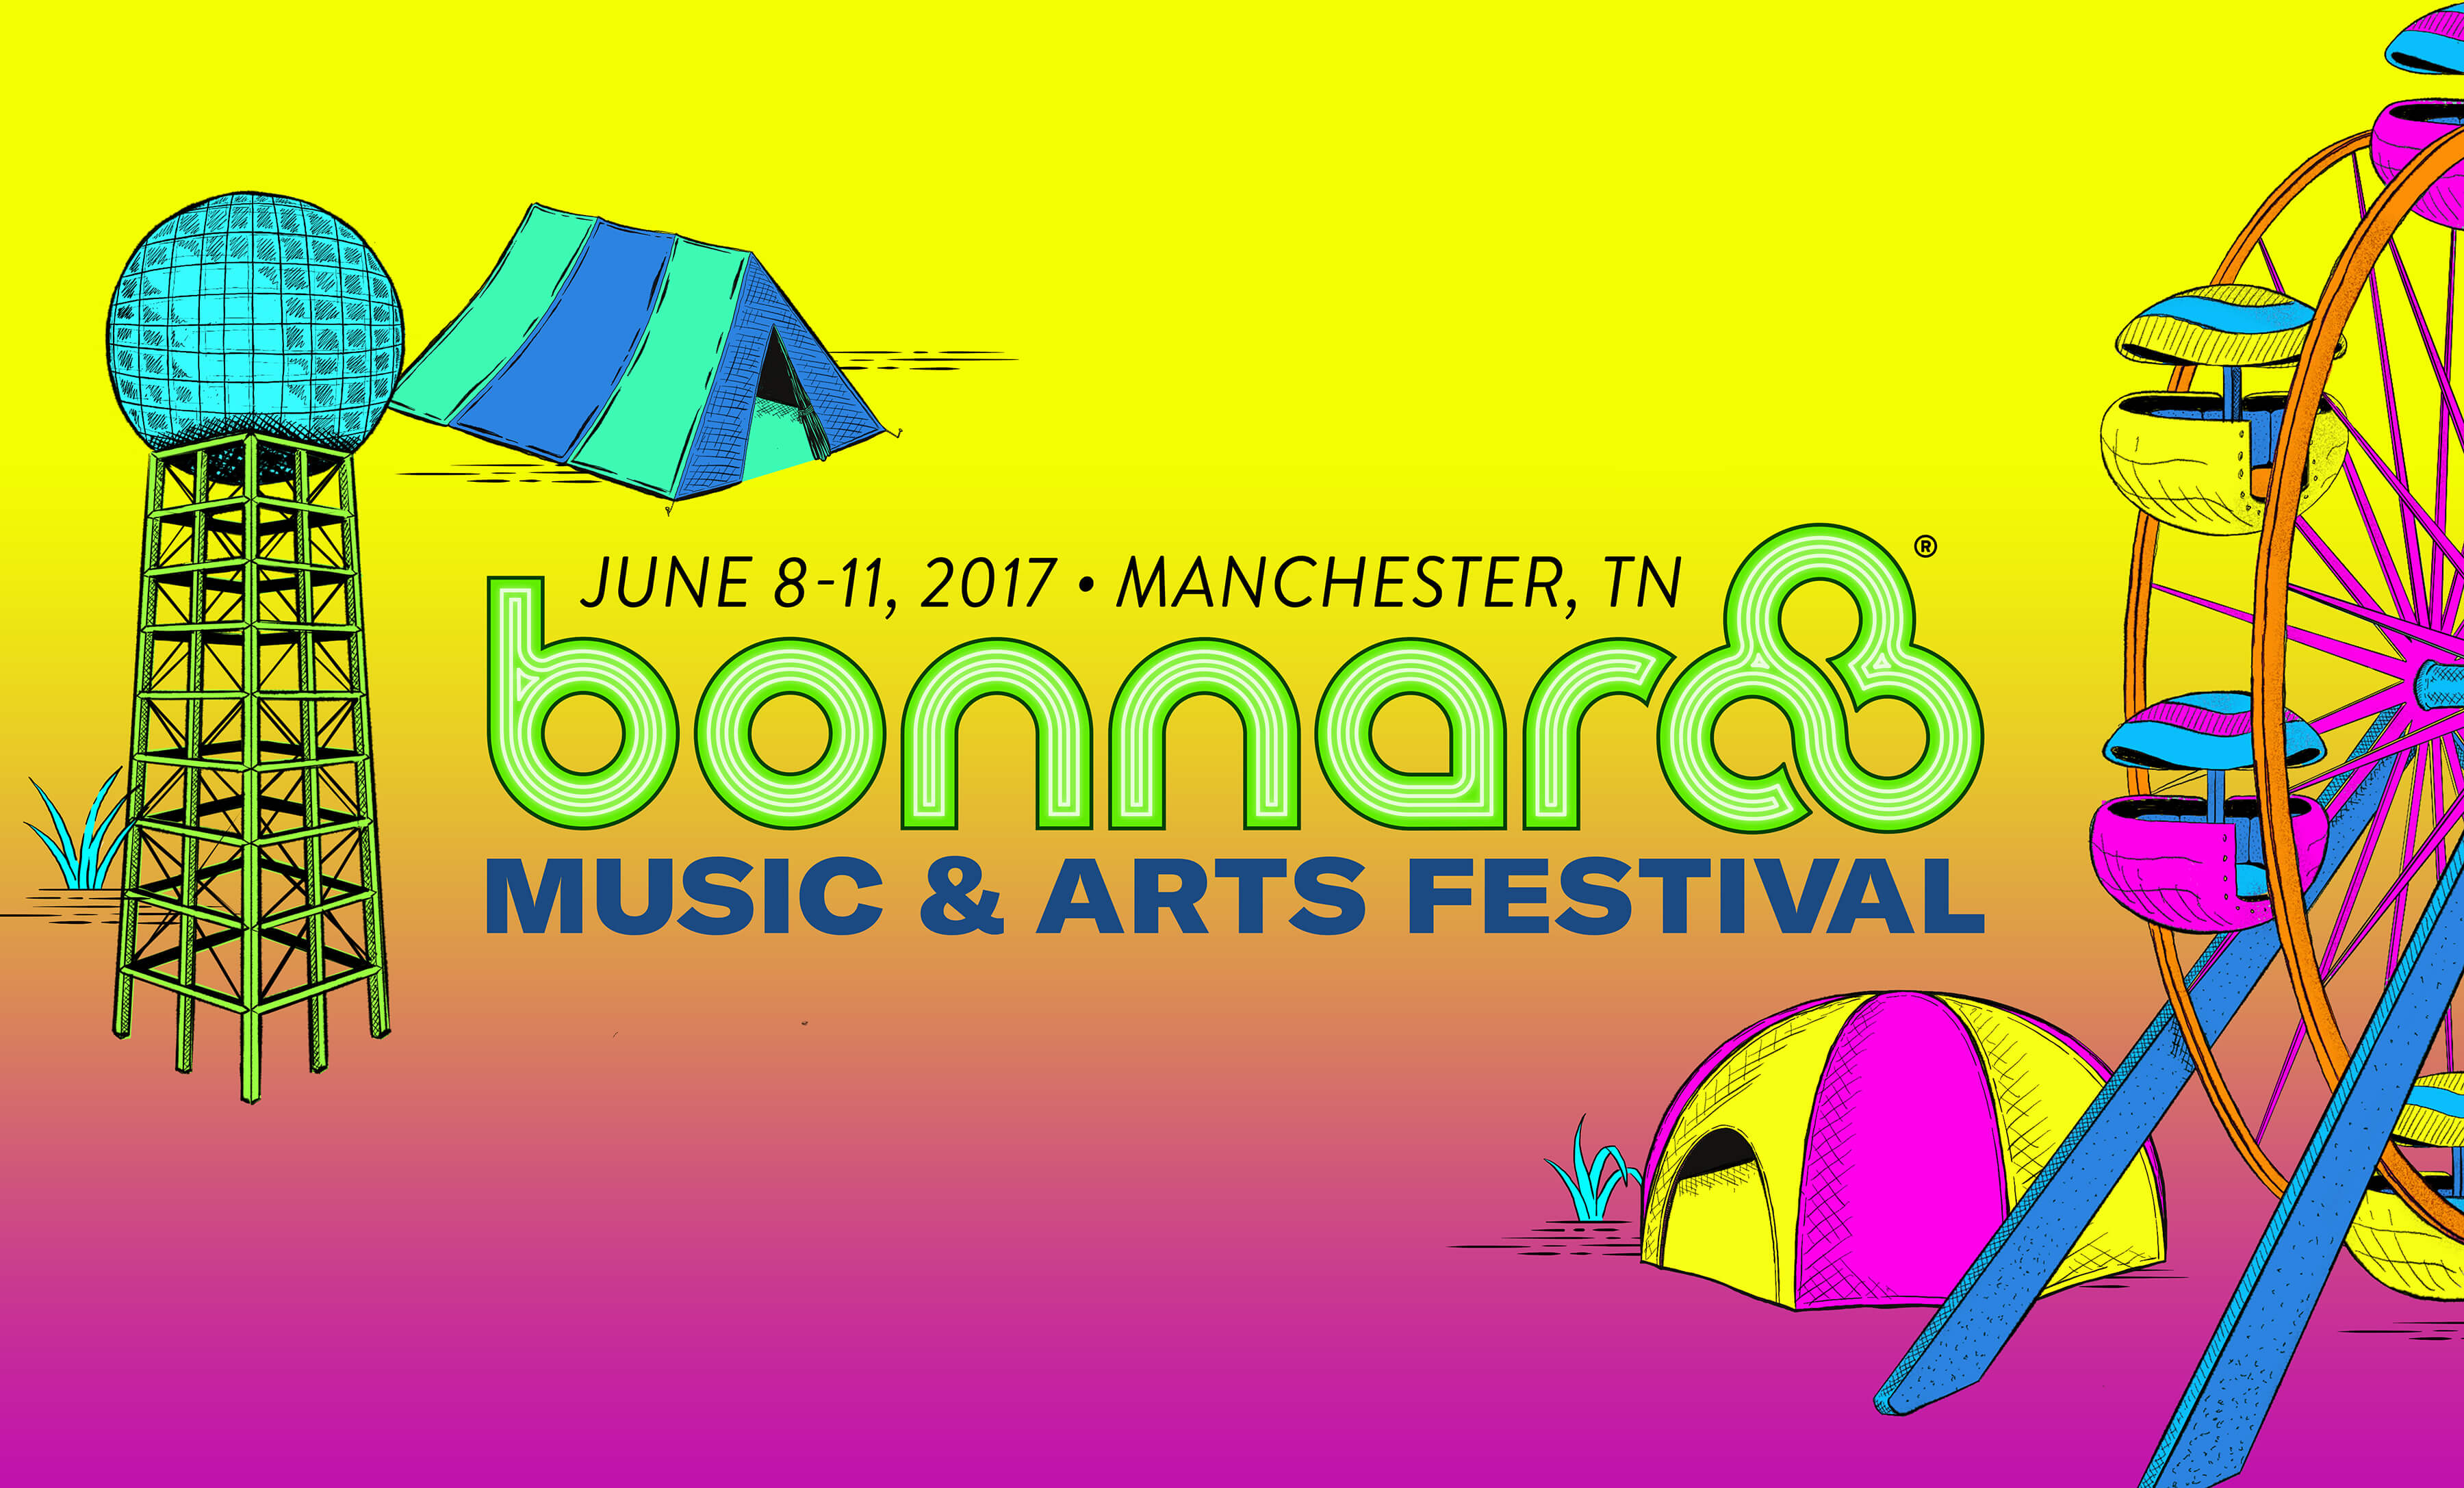 Initial art created for Bonnaroo Music & Arts Festival pitch featuring the logo, the clocktower, the tents, and the ferris wheel.